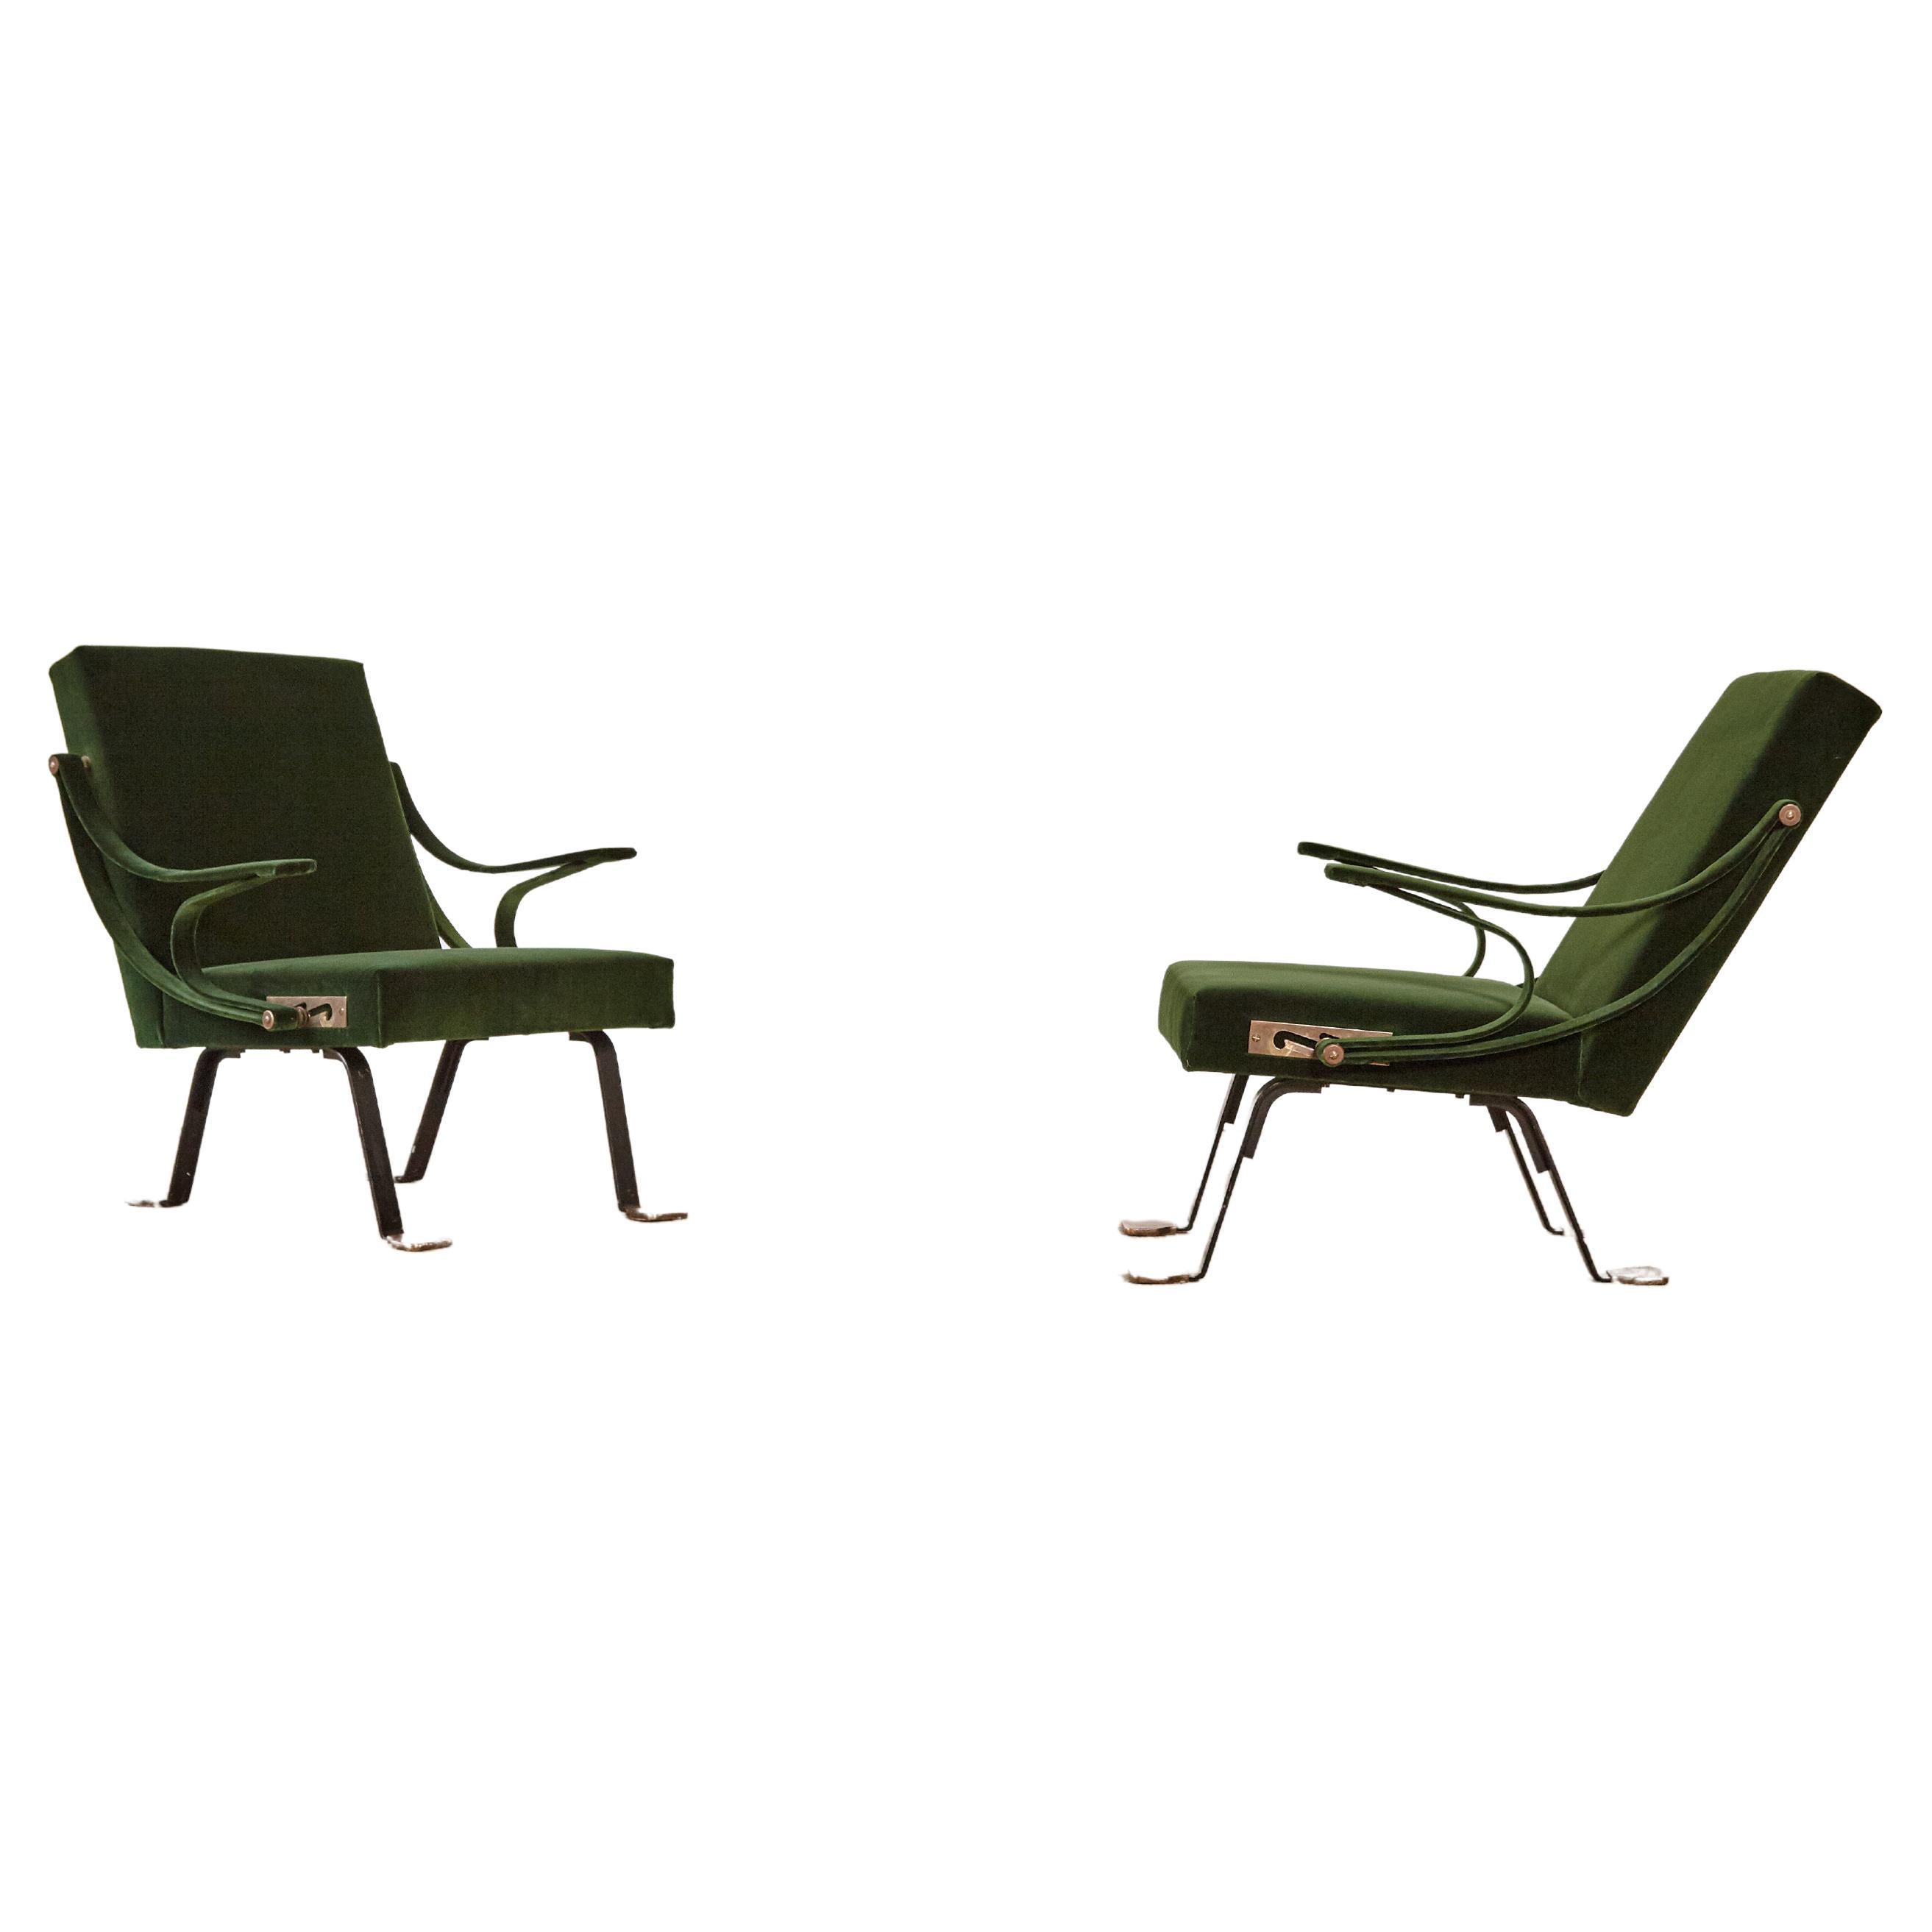 Rare Pair of 1st Edition Ignazio Gardella Reclining Digamma Chairs, 1960s, Italy